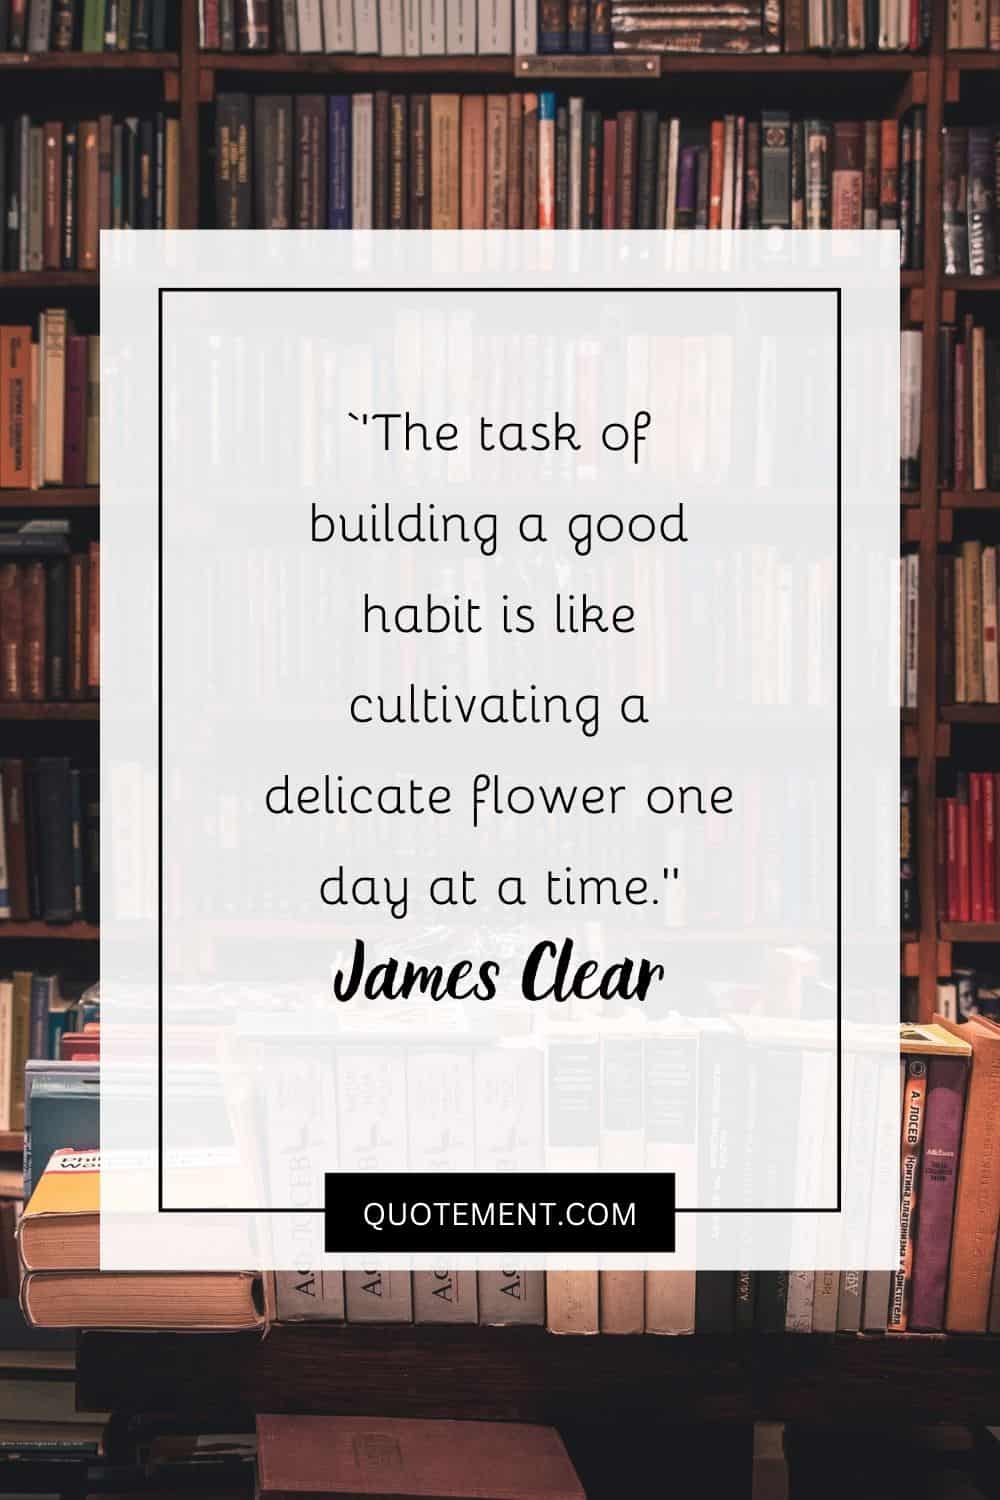 The task of building a good habit is like cultivating a delicate flower one day at a time.